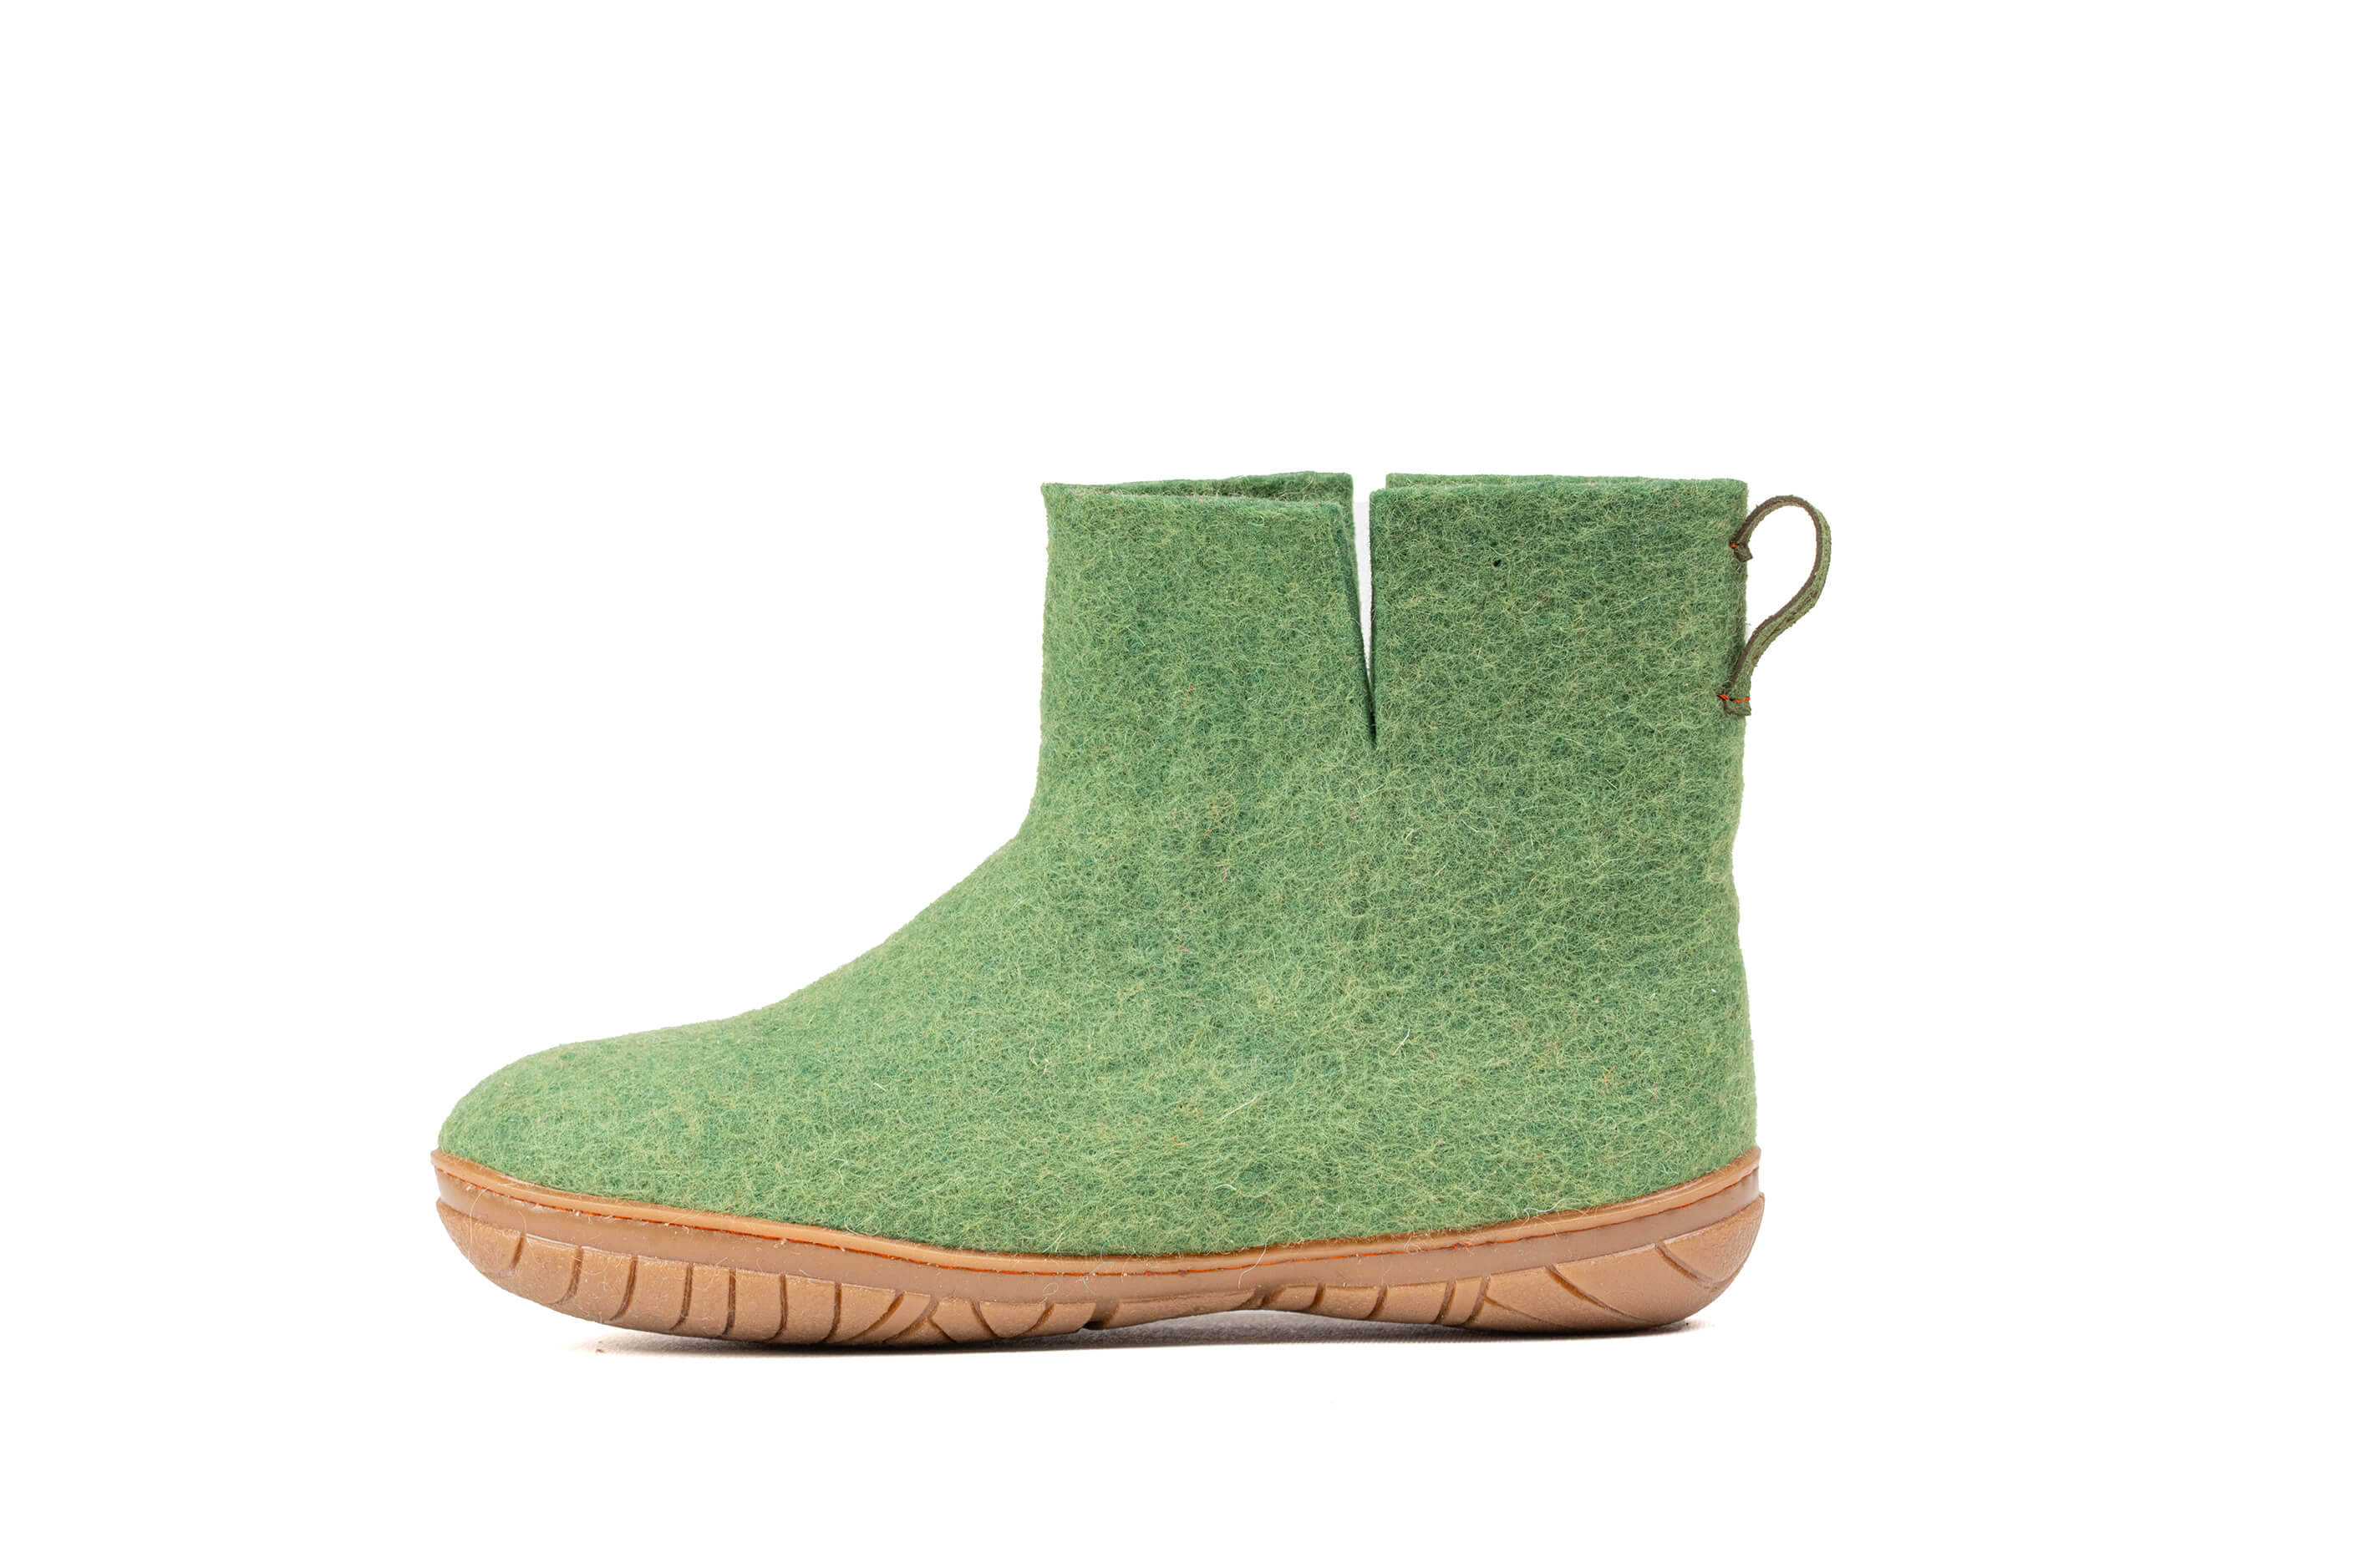 Outdoor Low Boots With Rubber Sole - Green